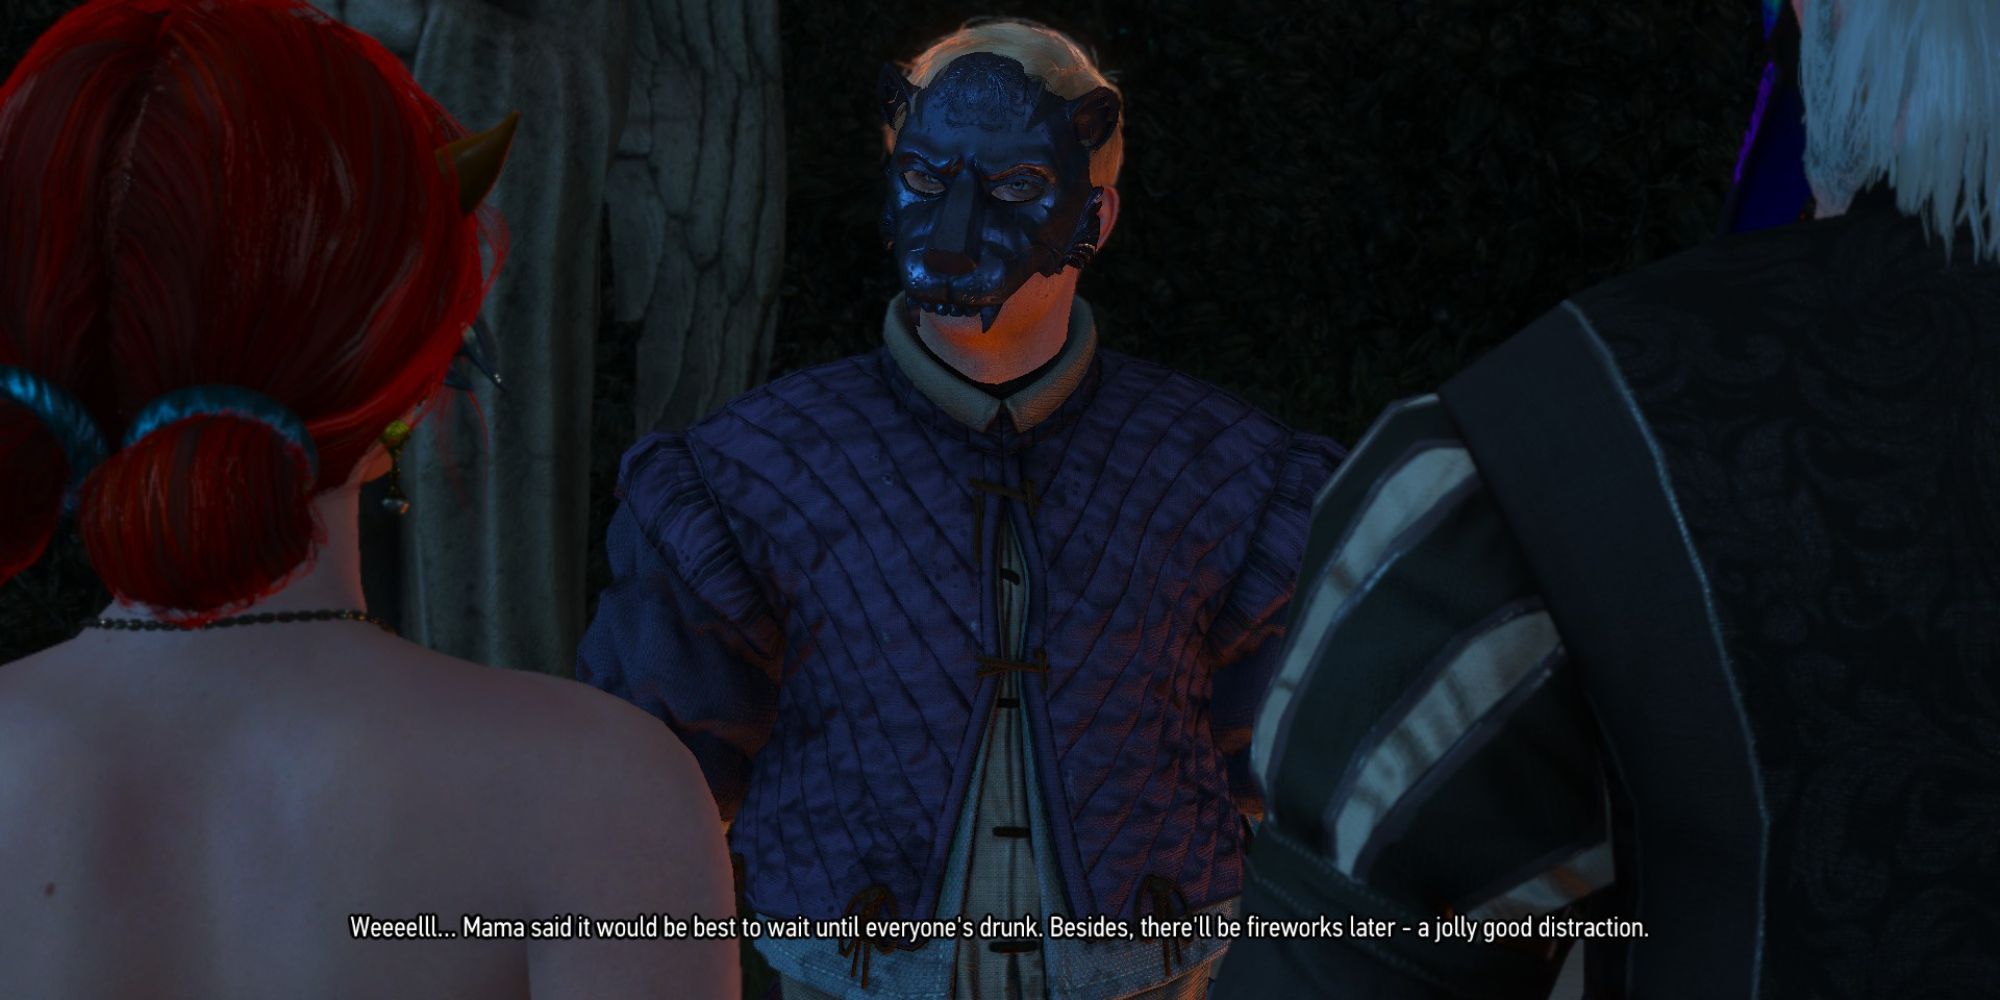 Finding Albert in the quest a matter of life and death in the Witcher 3